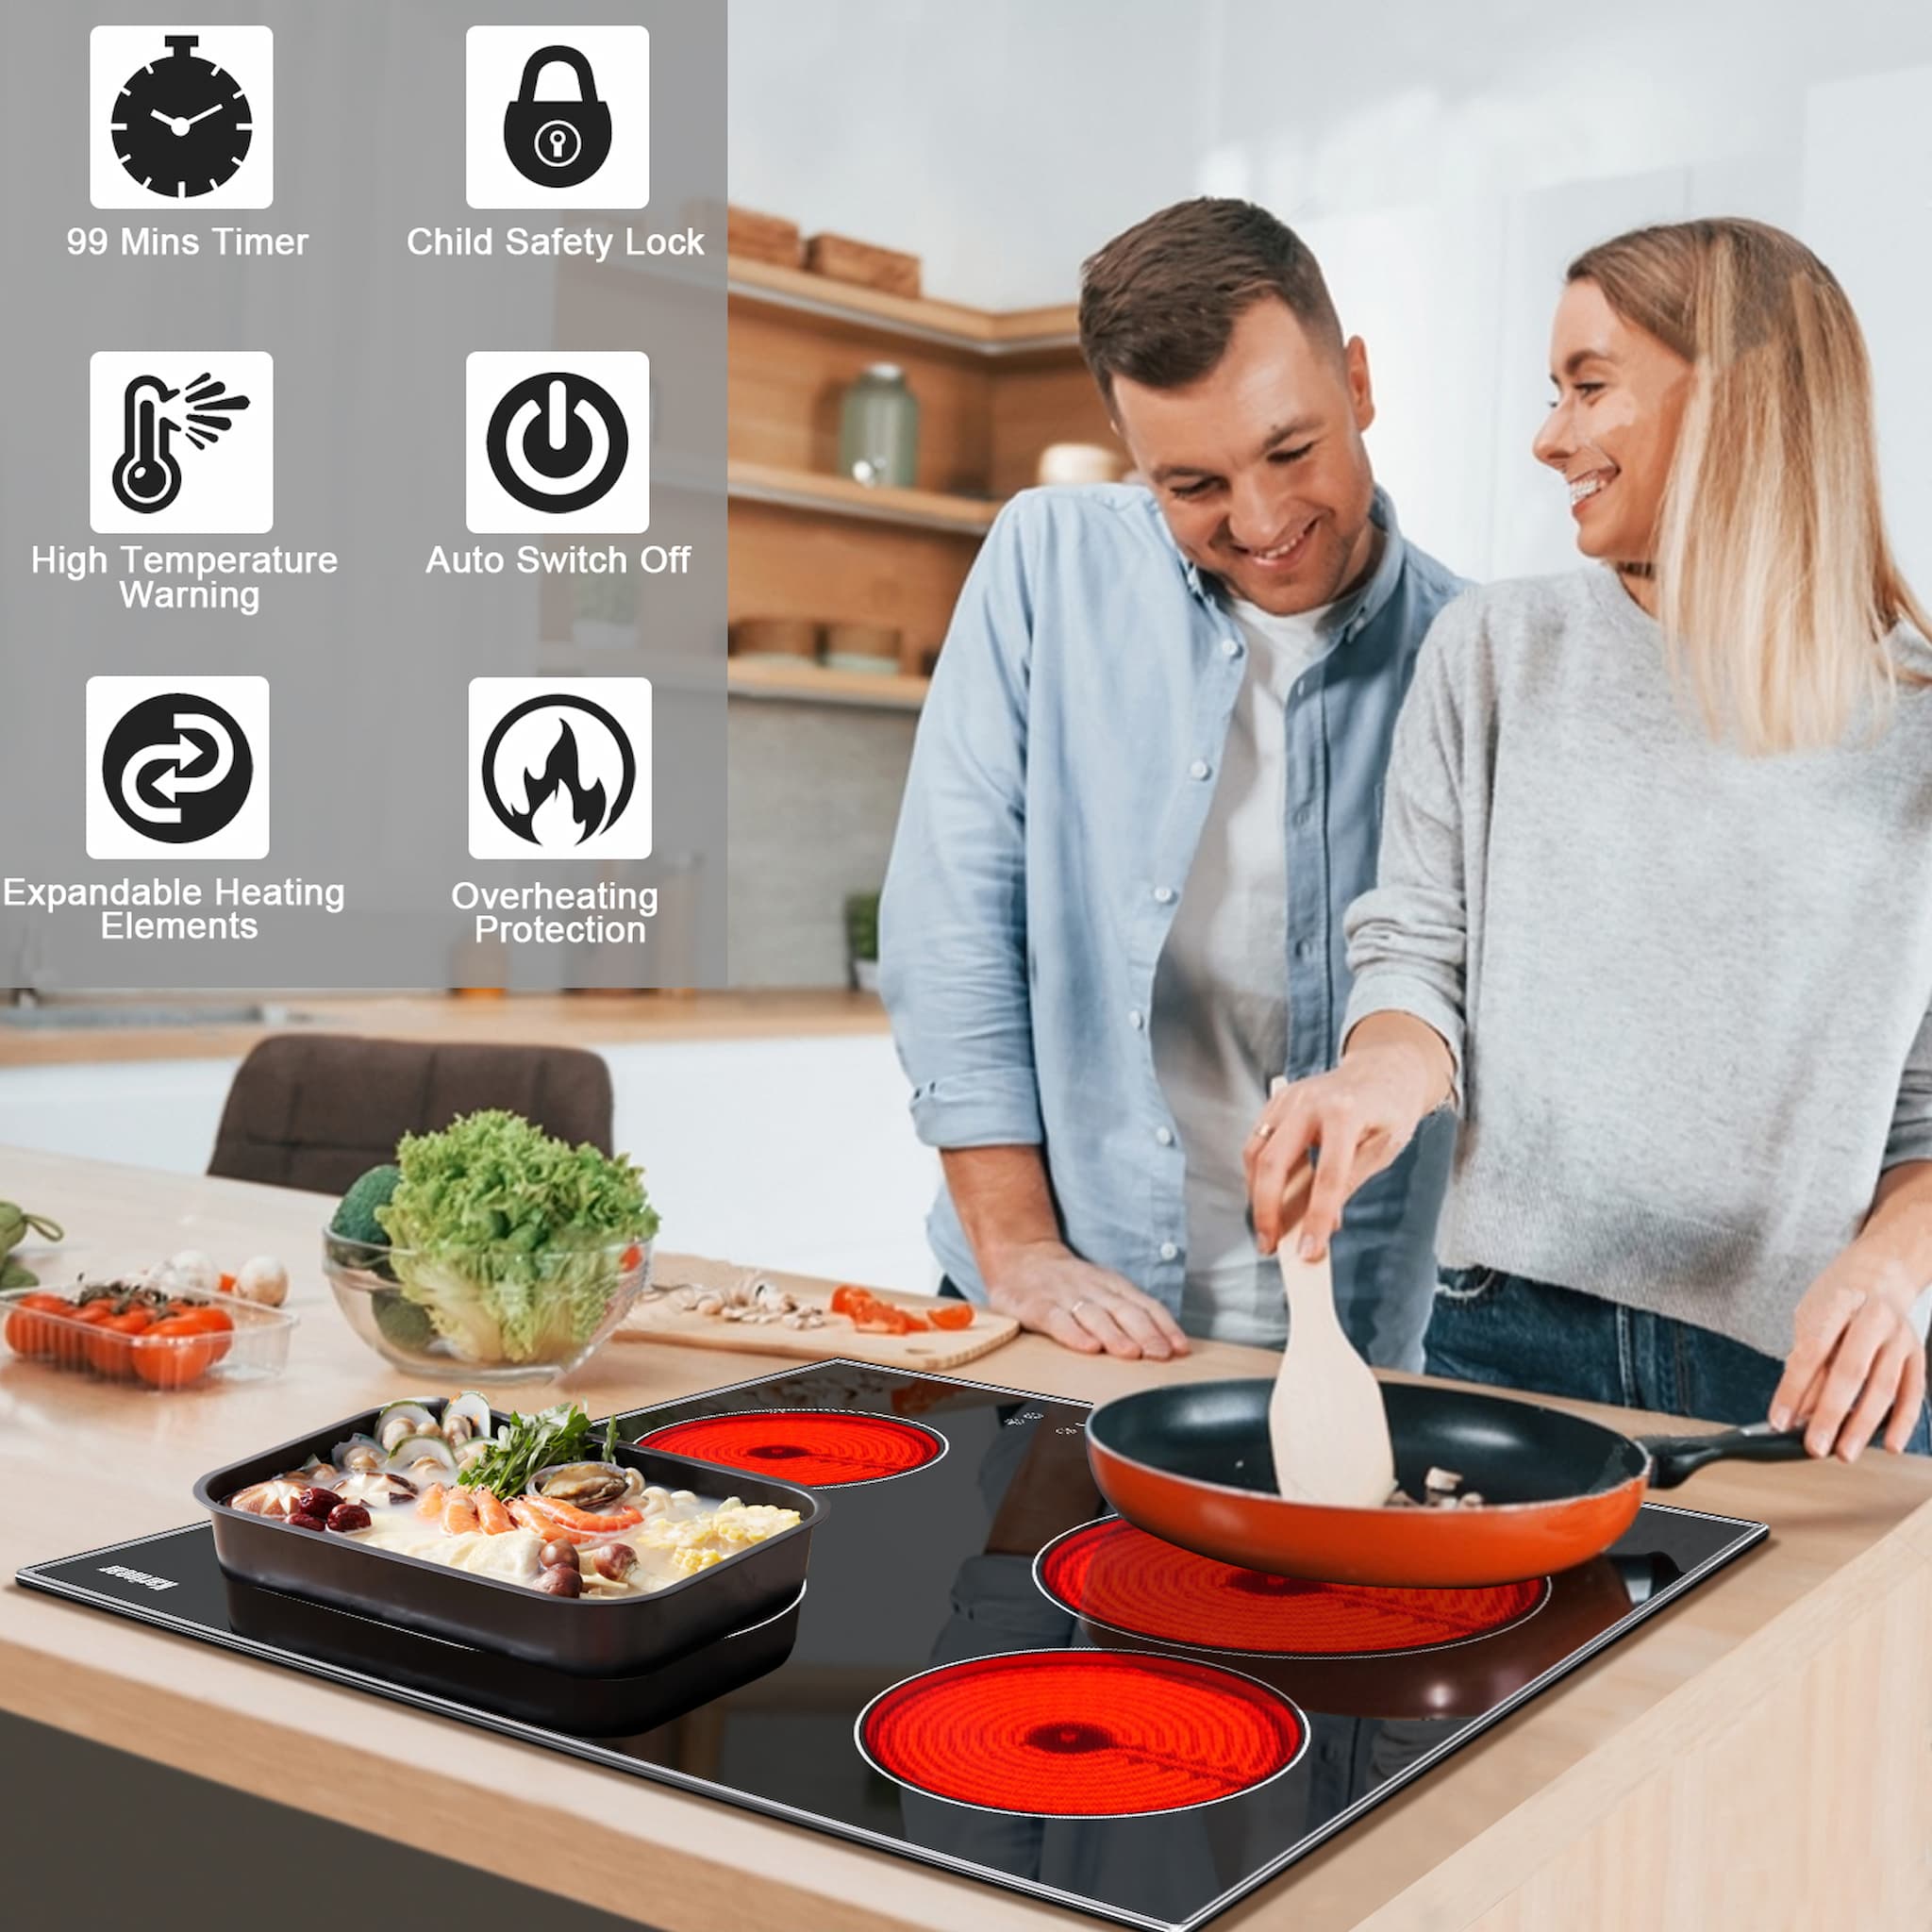 Karinear 30 inch electric cooktop is equipped with 5 burners, 2 of which have expandable heating elements, convenient for larger cookware. The electric cooktop 5 burners reaches high power output of 8400W: 1200W+1200W +1800W+ 1100W/2000W(Dual)